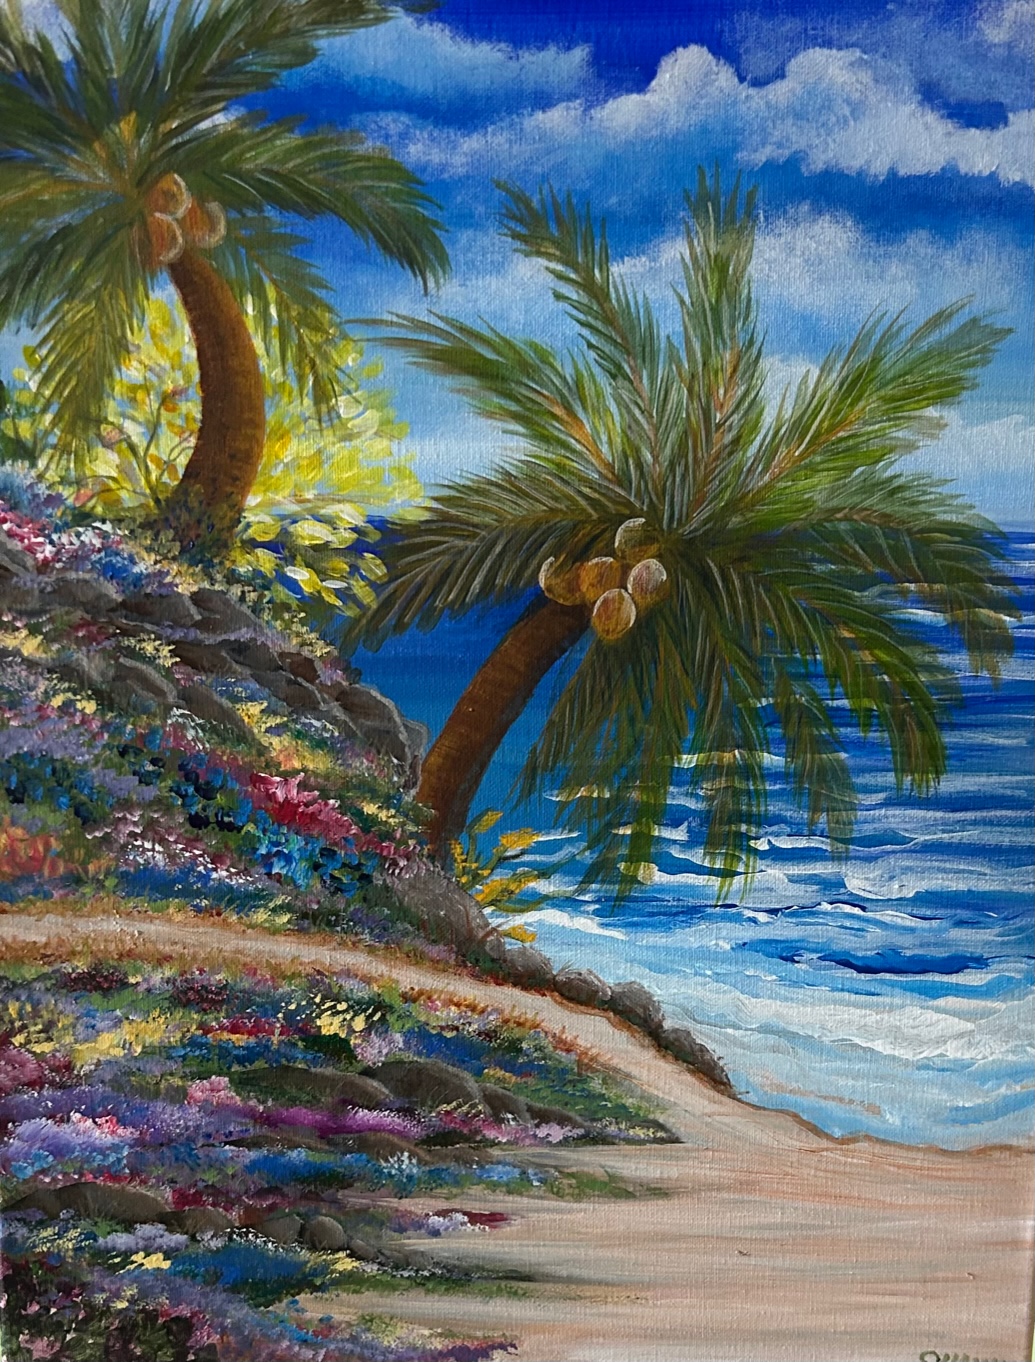 Painting Events & Art Classes for Kids in Jupiter, FL